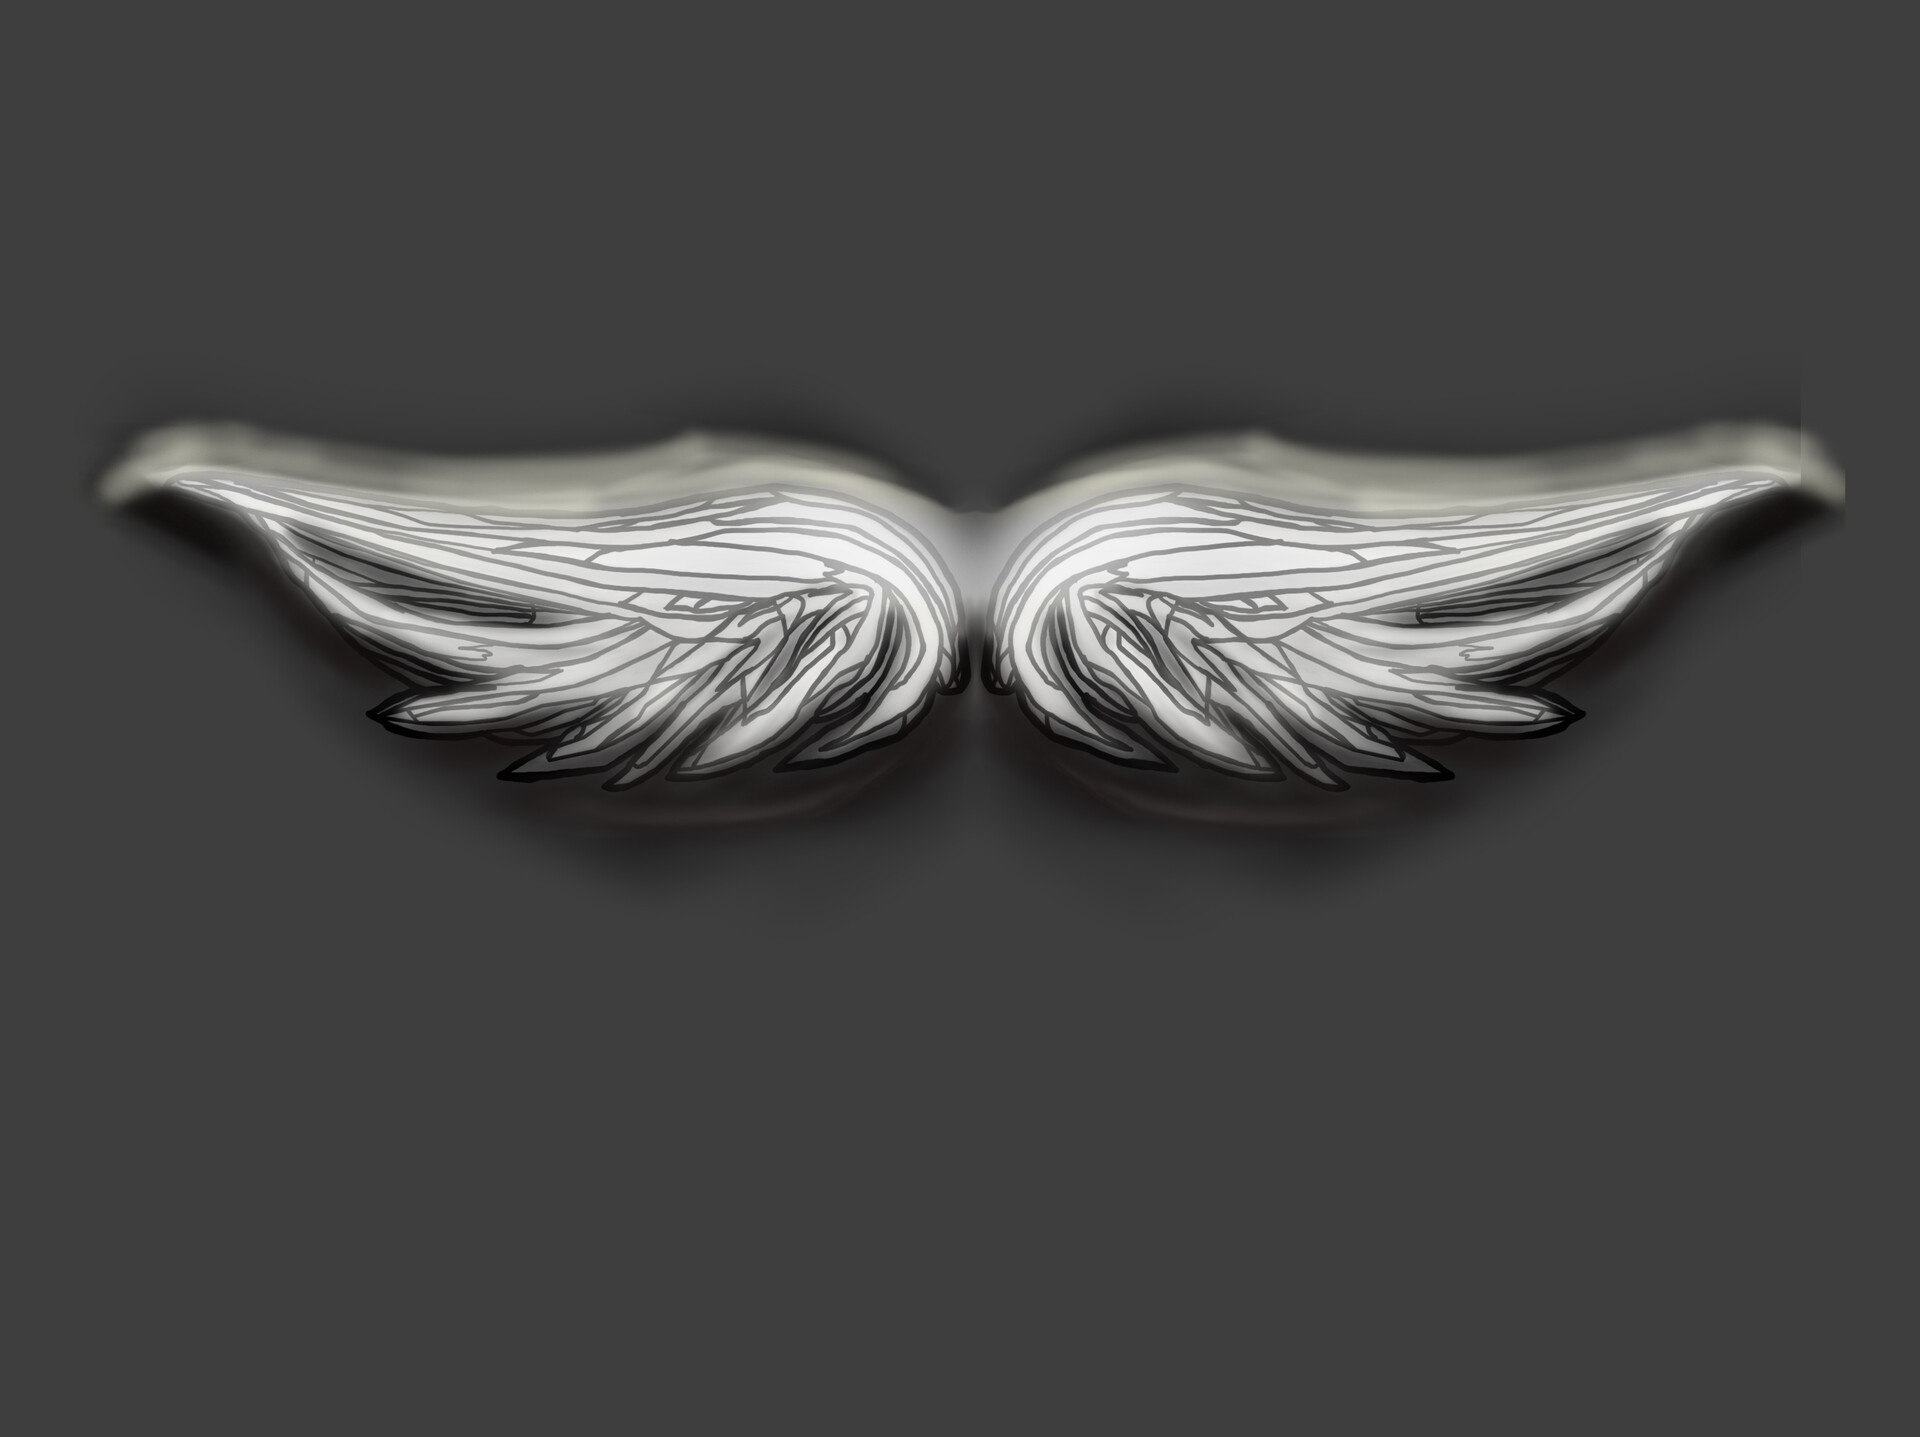 ArtStation - angel wings from a necklace drawing